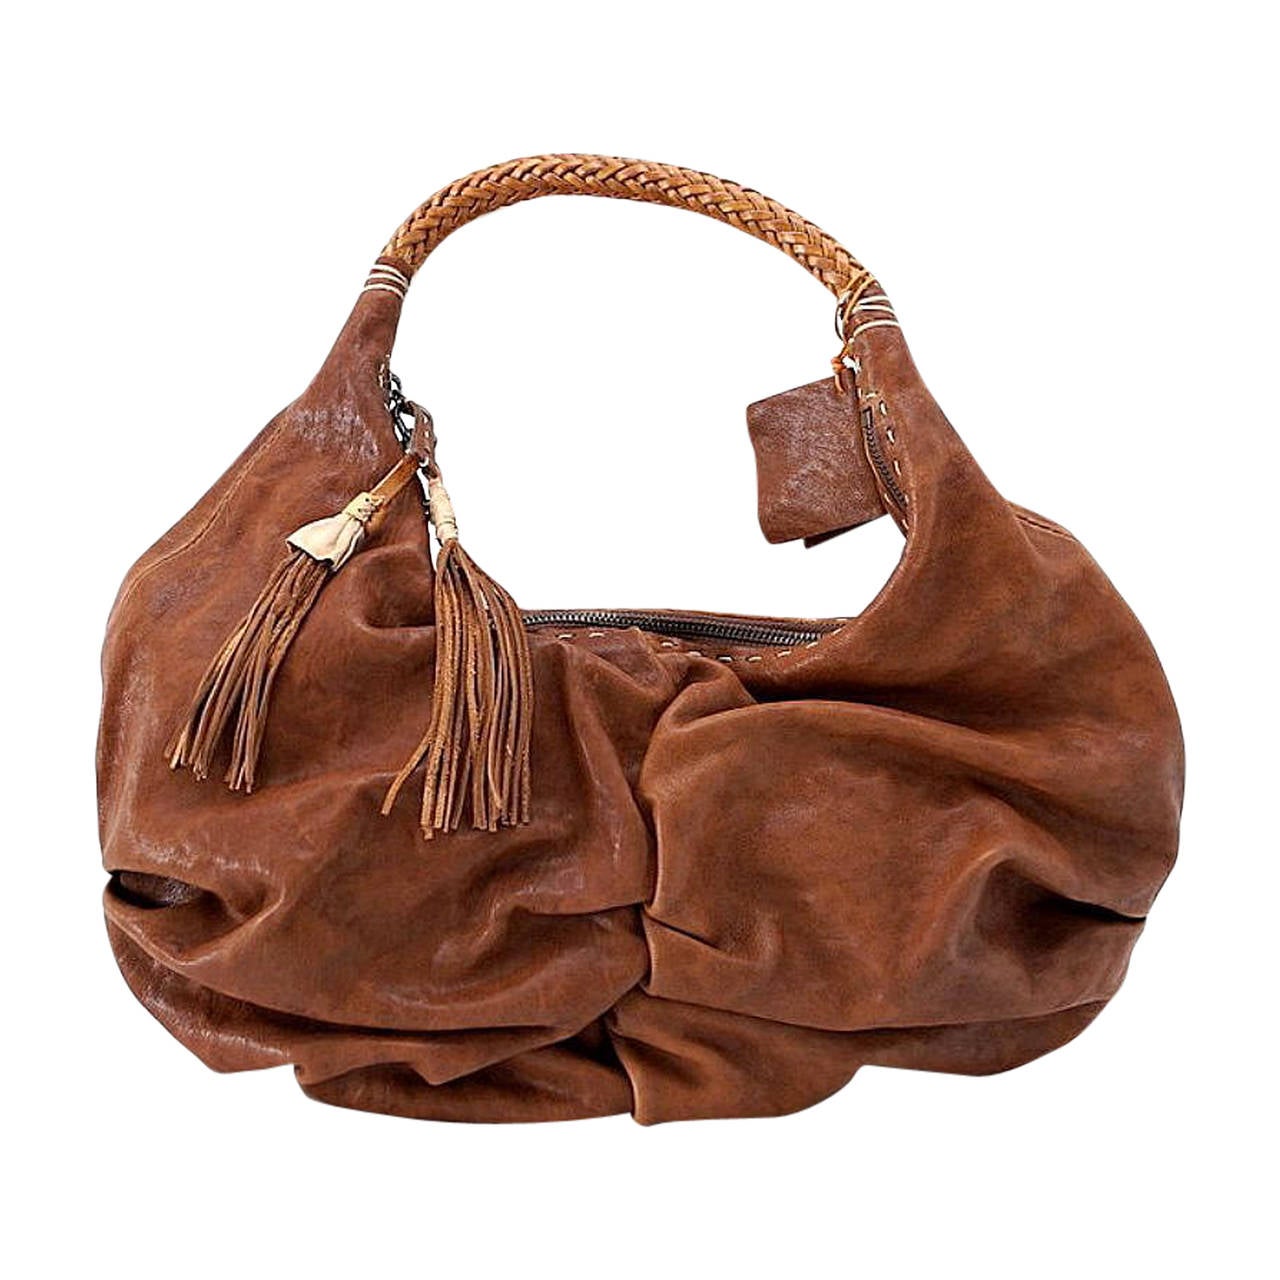 Henry Beguelin Bag Washed Leather Tassels Hobo Style nwt